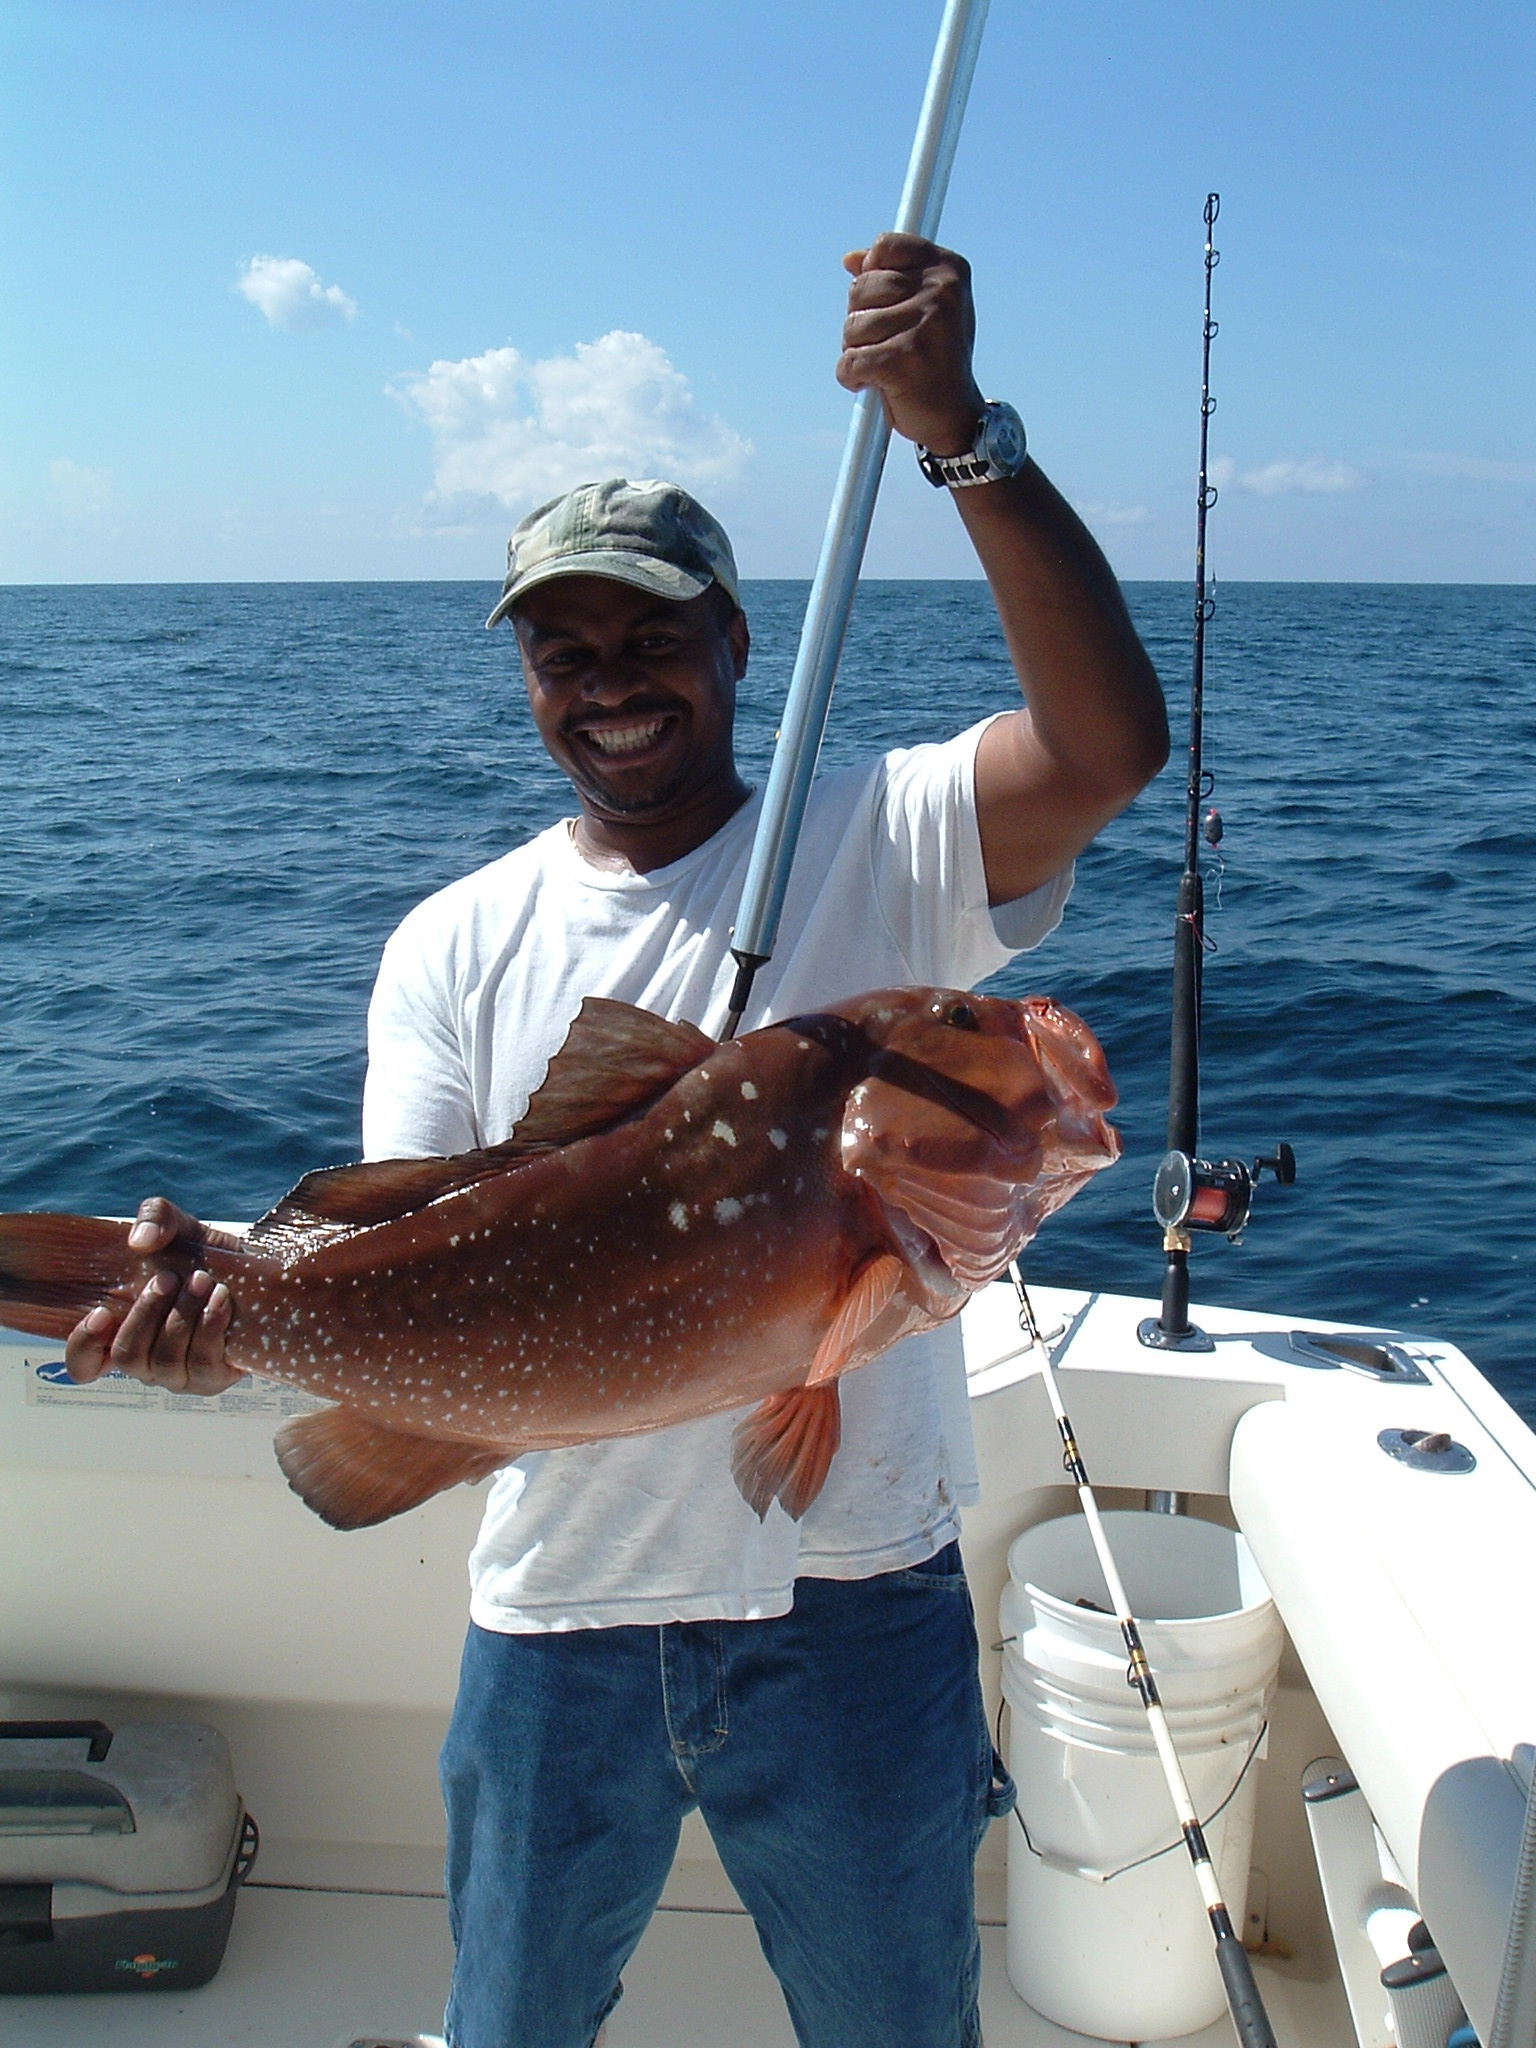 Fred Neal with a nice 14lb Red Grouper!